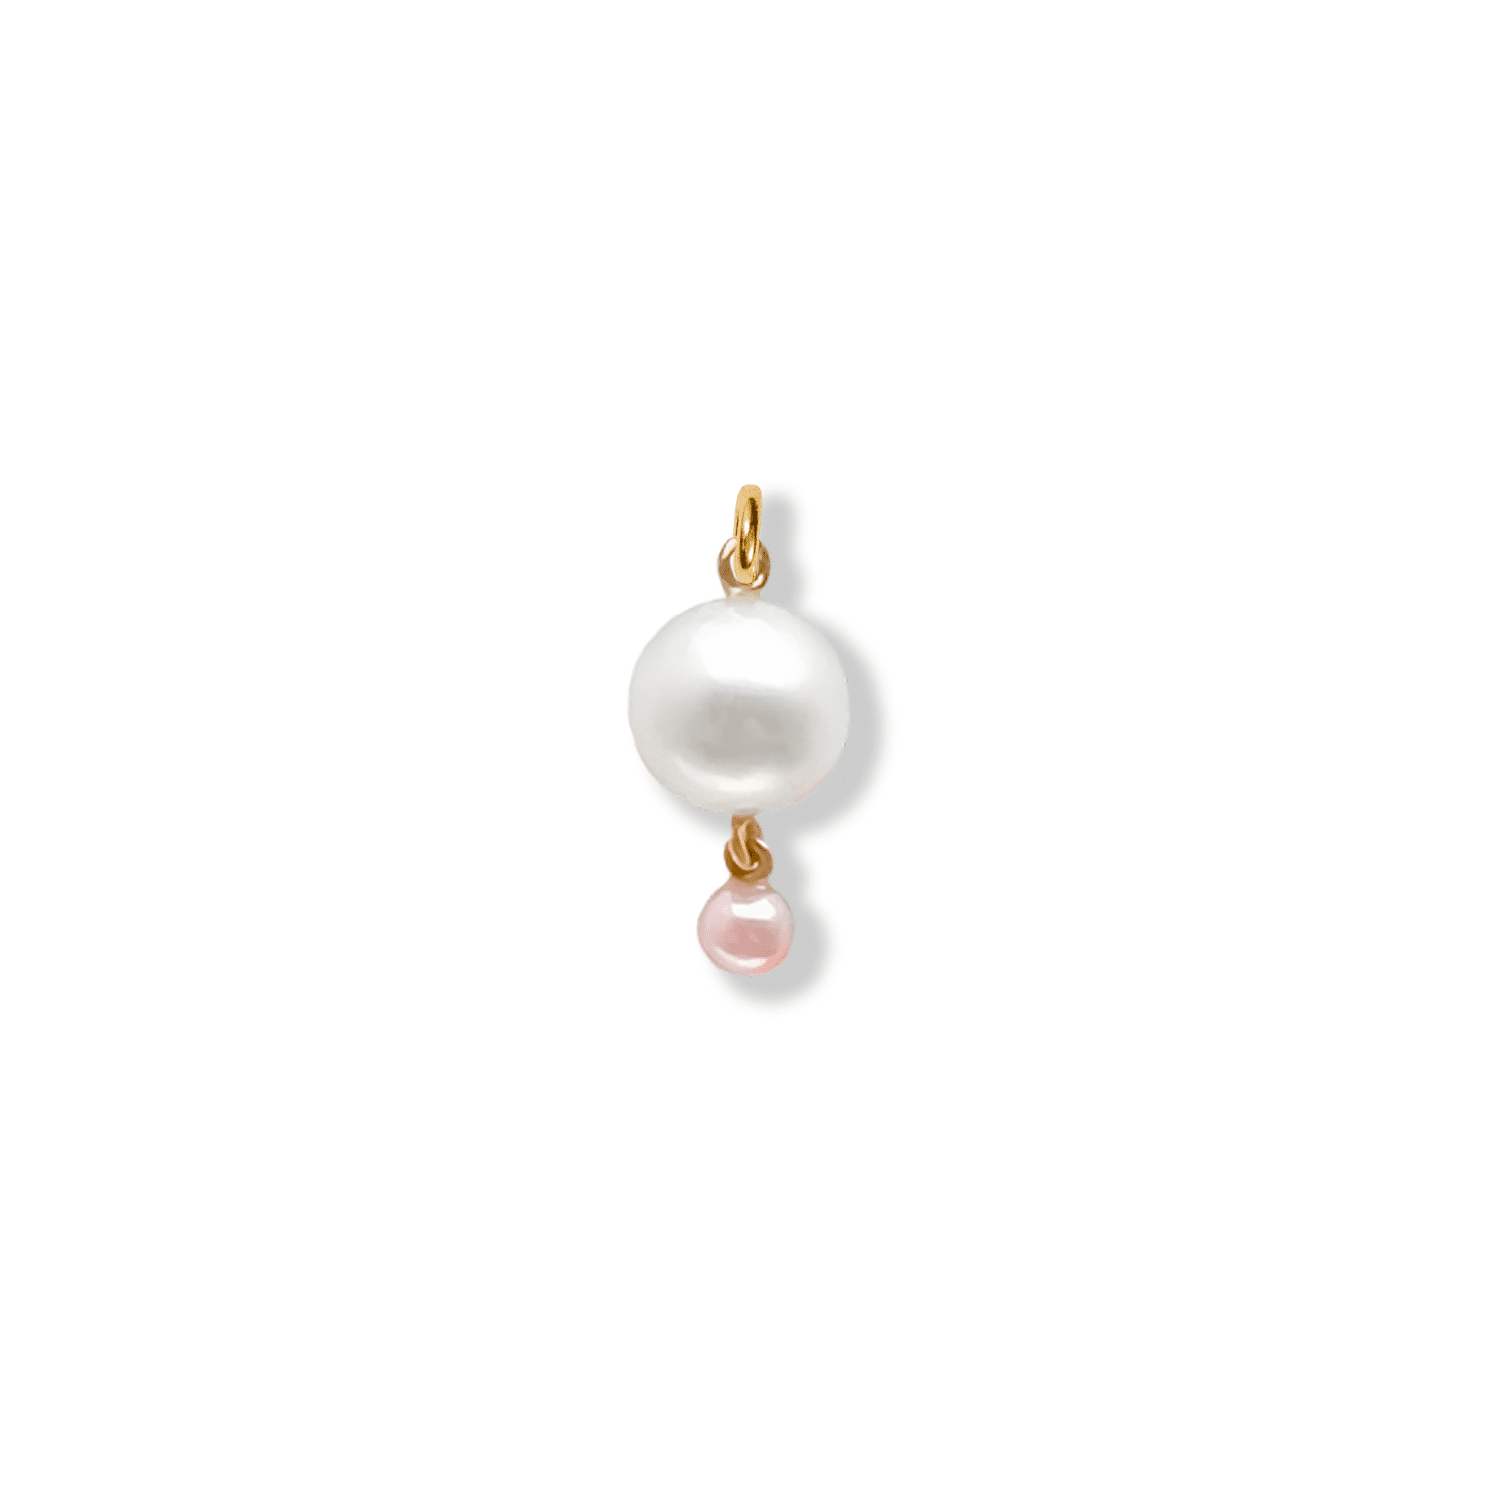 PENDANT TWO PEARL white pearl pendant for earrings